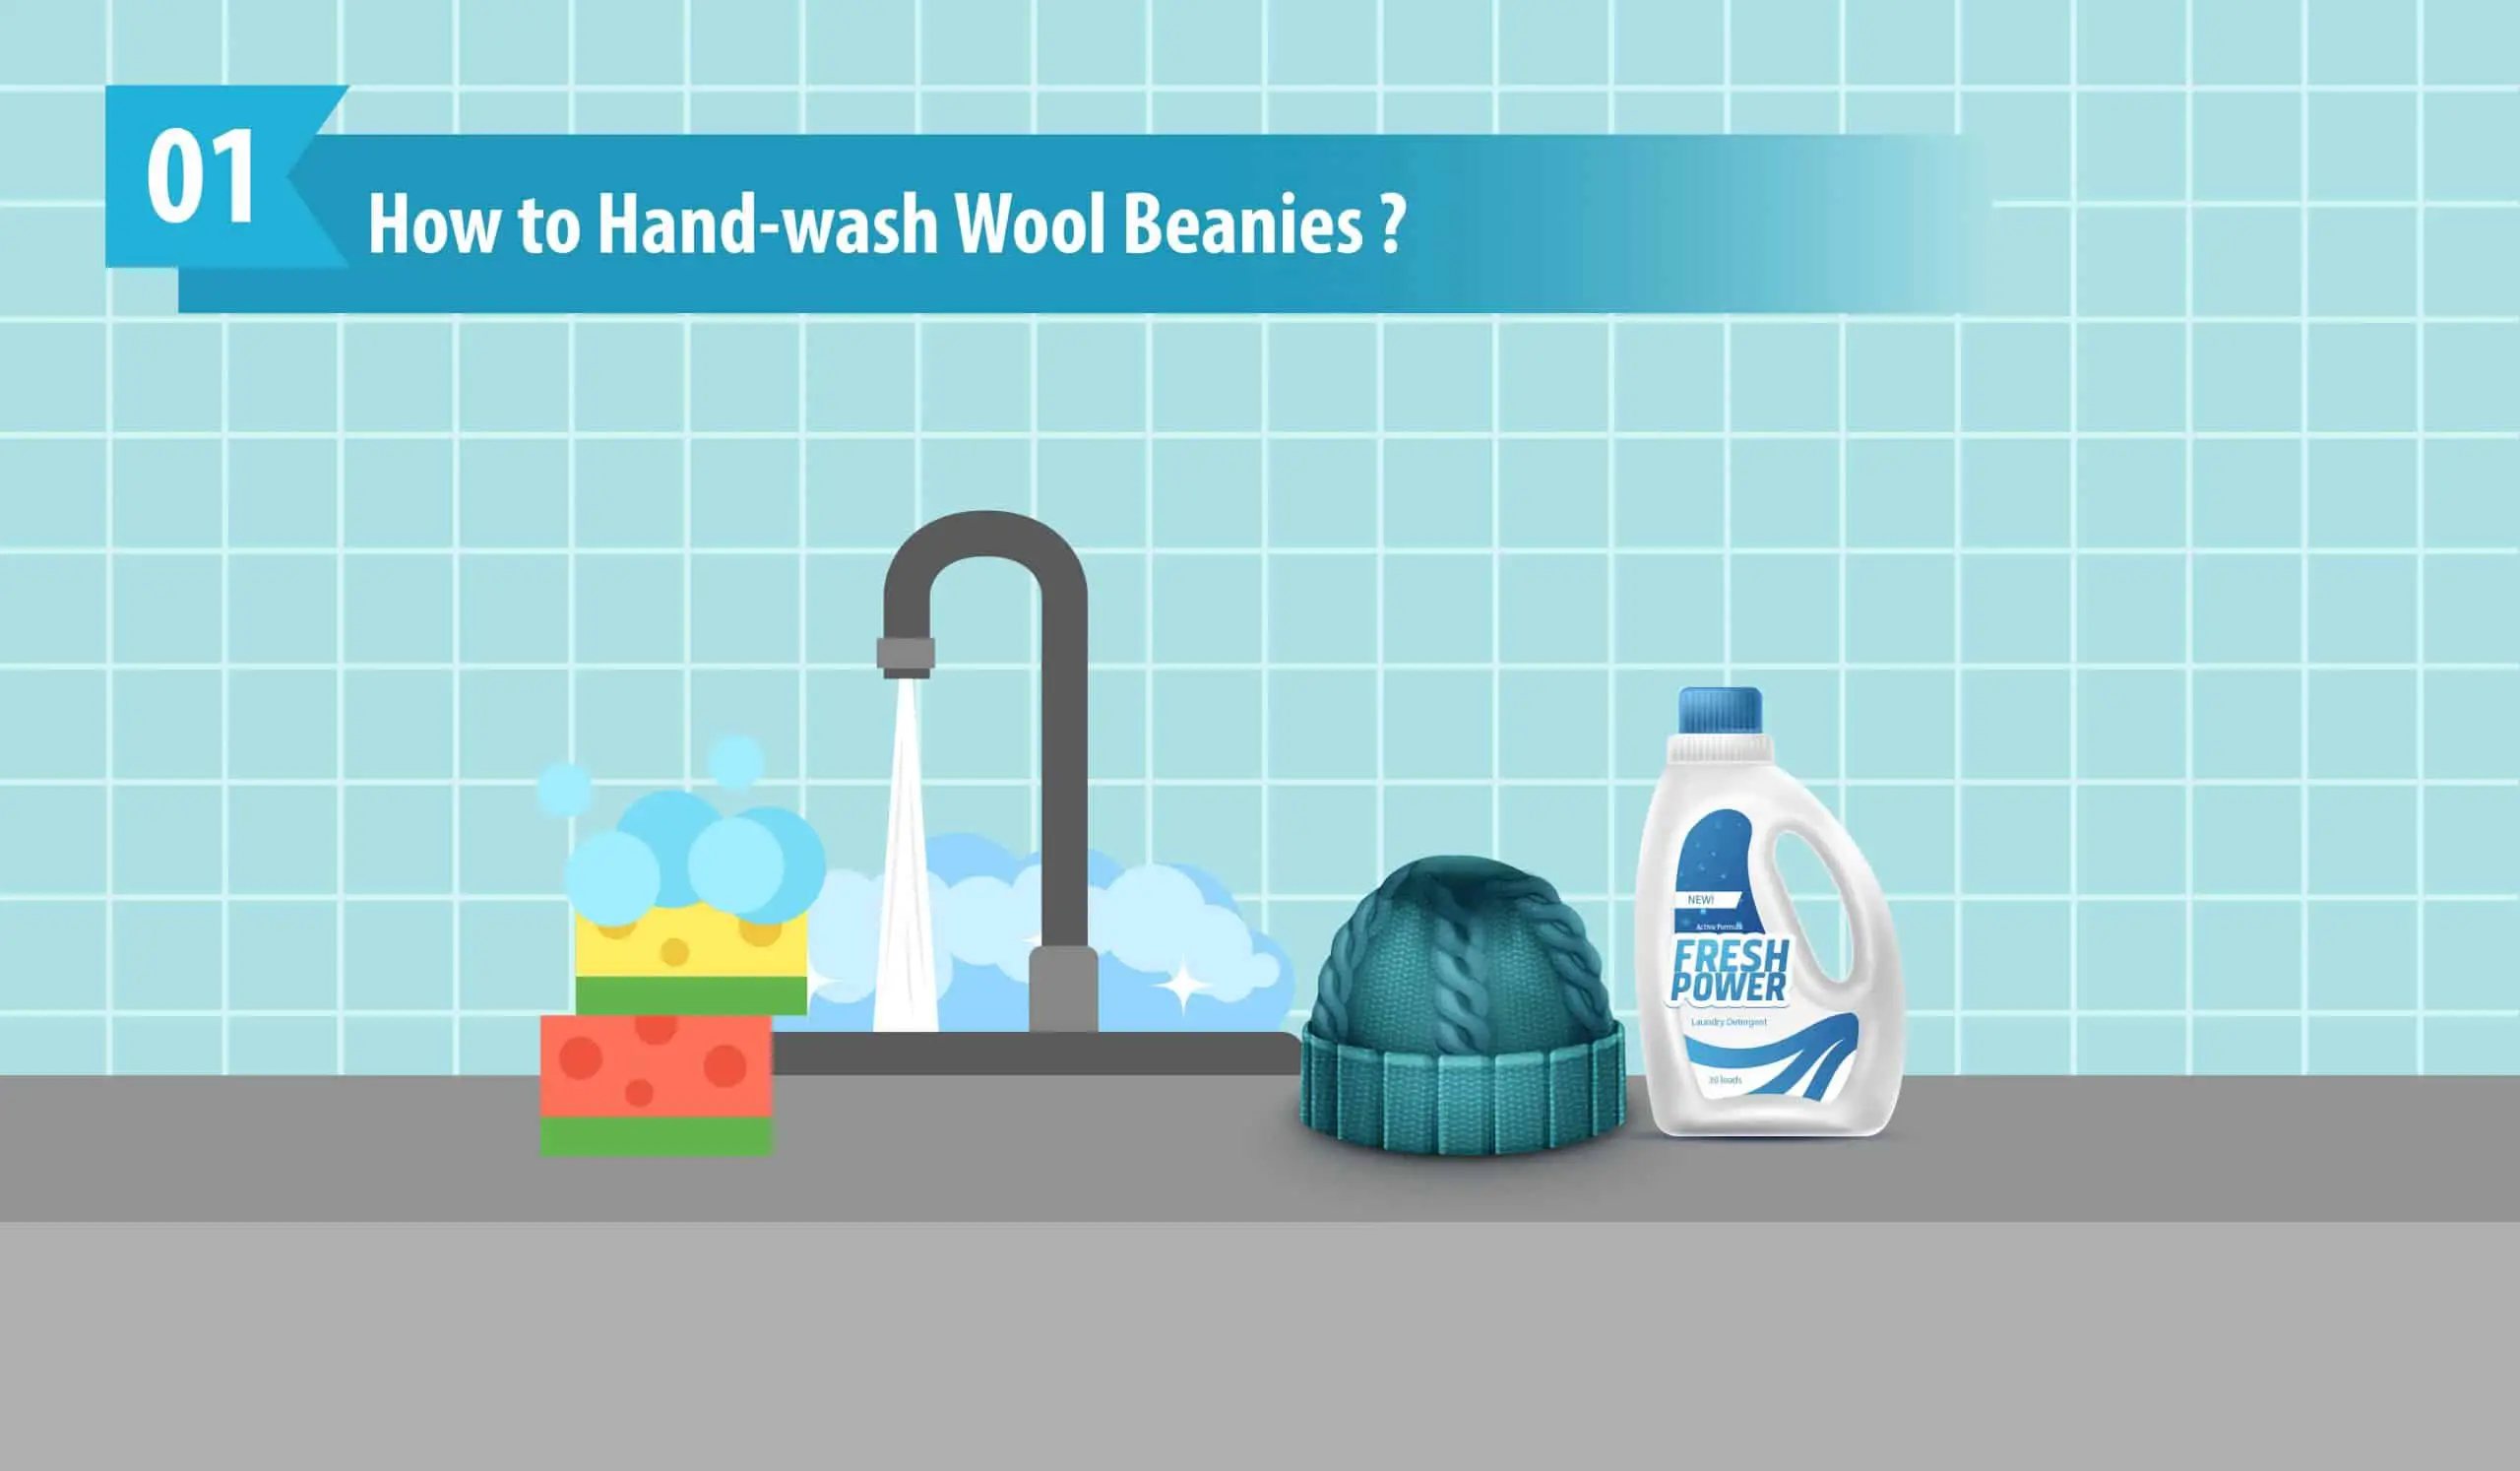 How to Hand-wash Wool Beanies-01